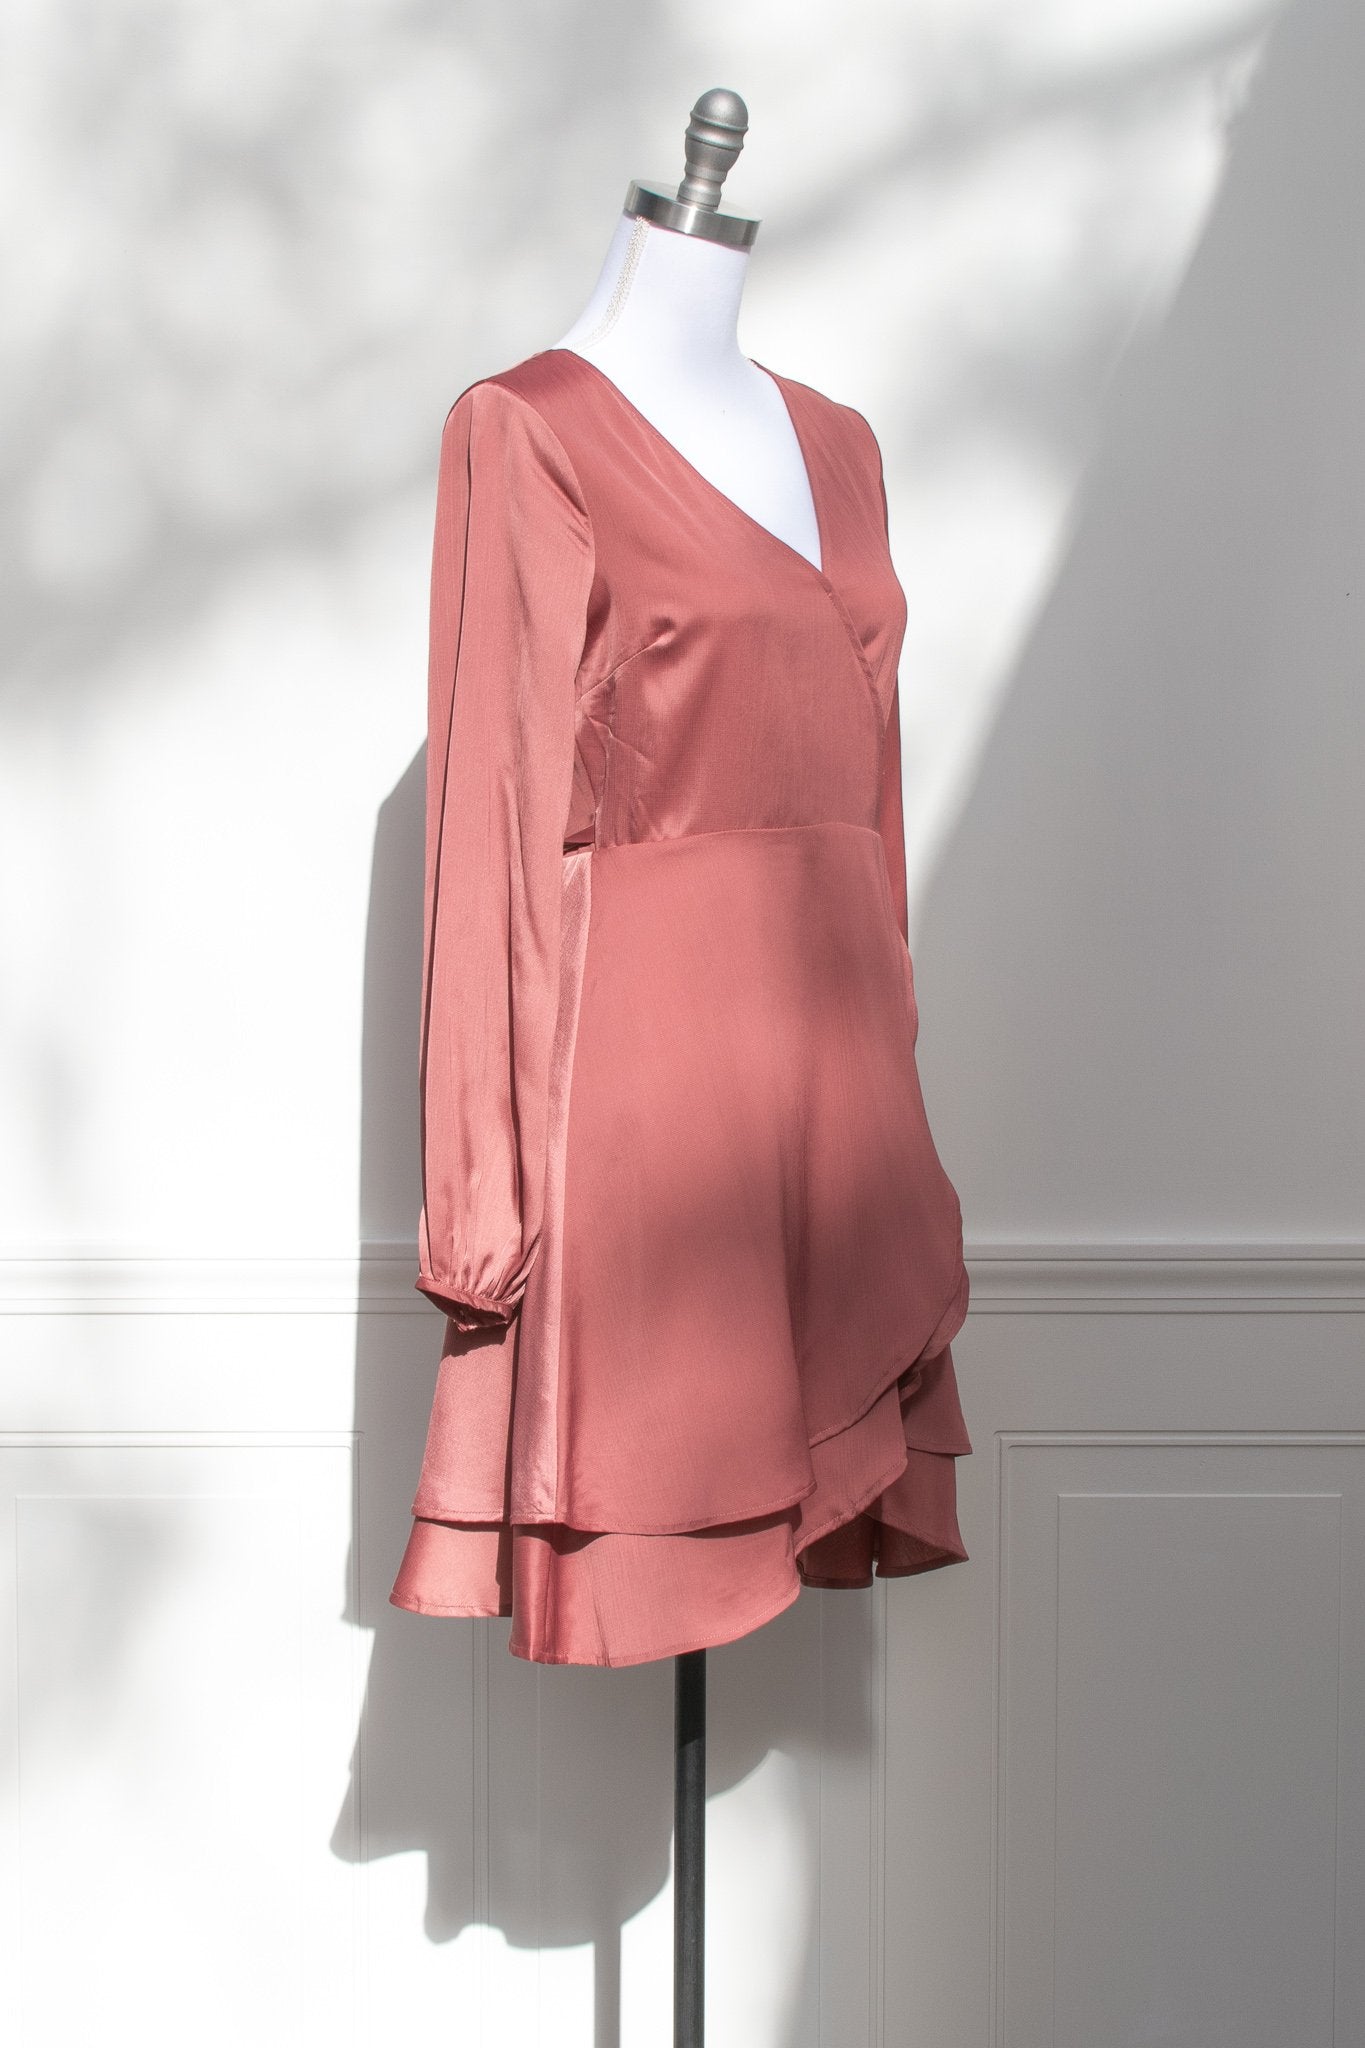 Coral Wrap Dress Hotsell, 56% OFF ...